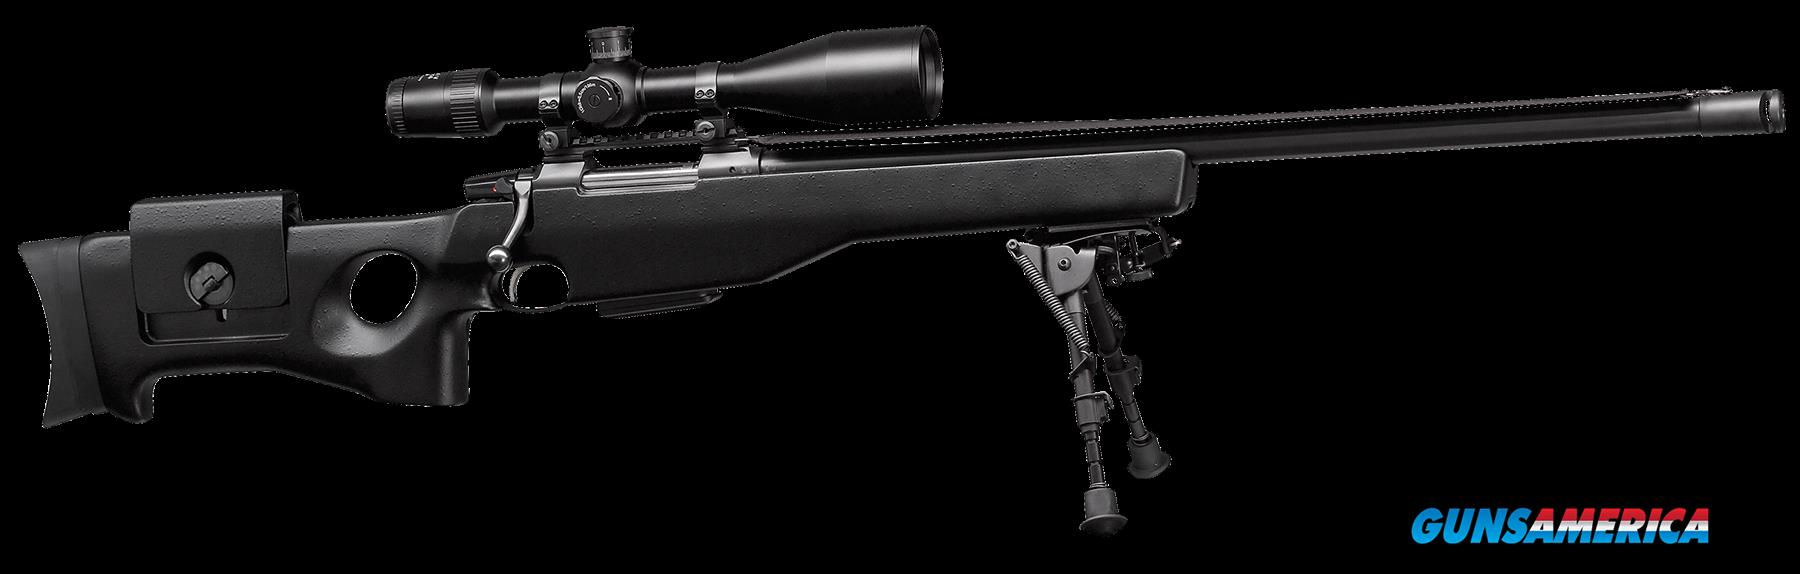 cz 750 sniper rifle review